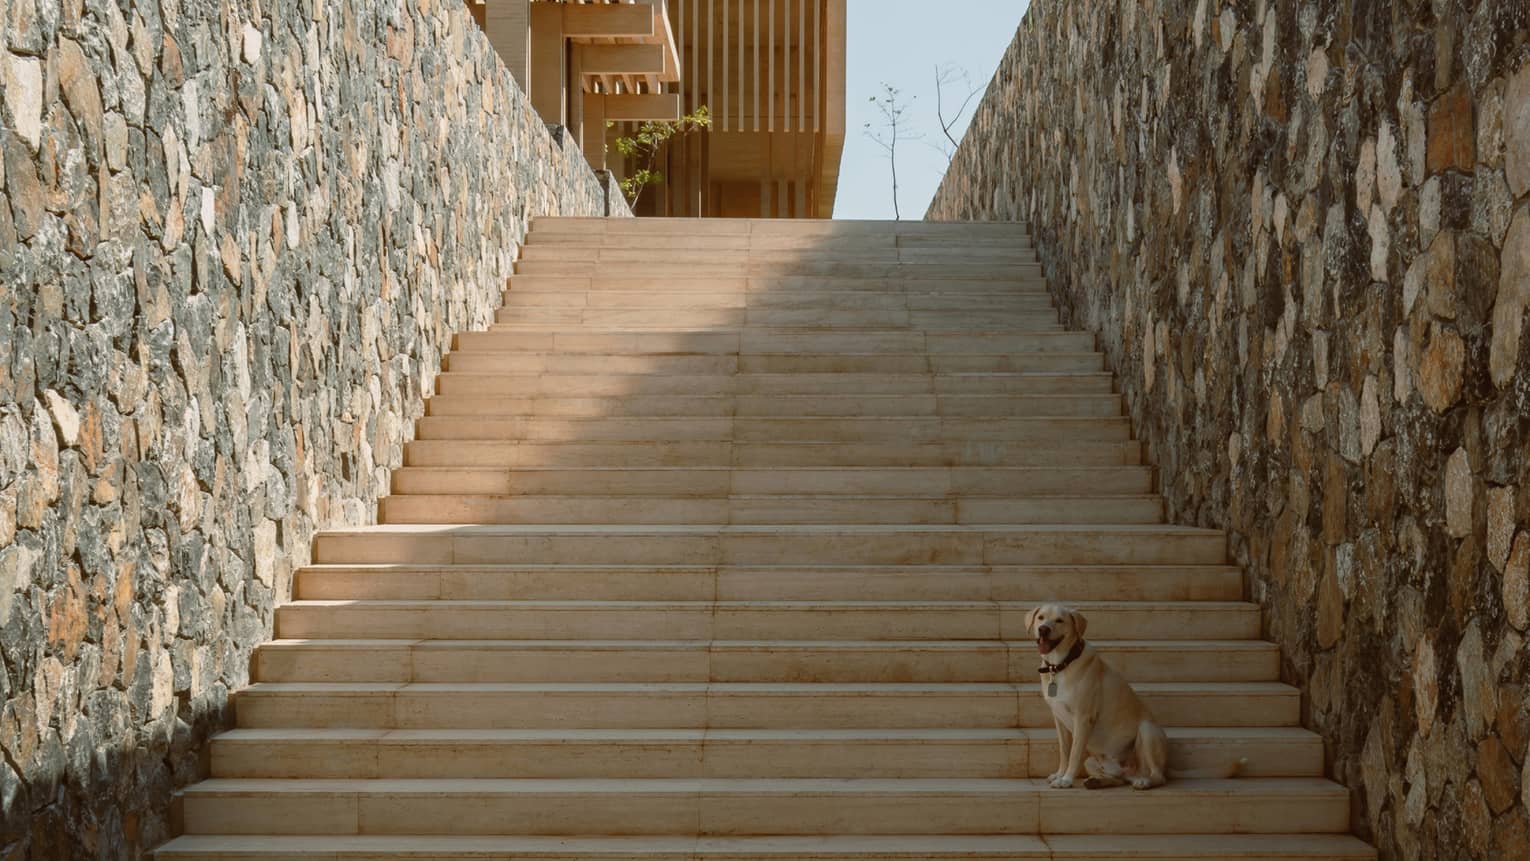 Small dog sits on wooden stairs in between two stone walls